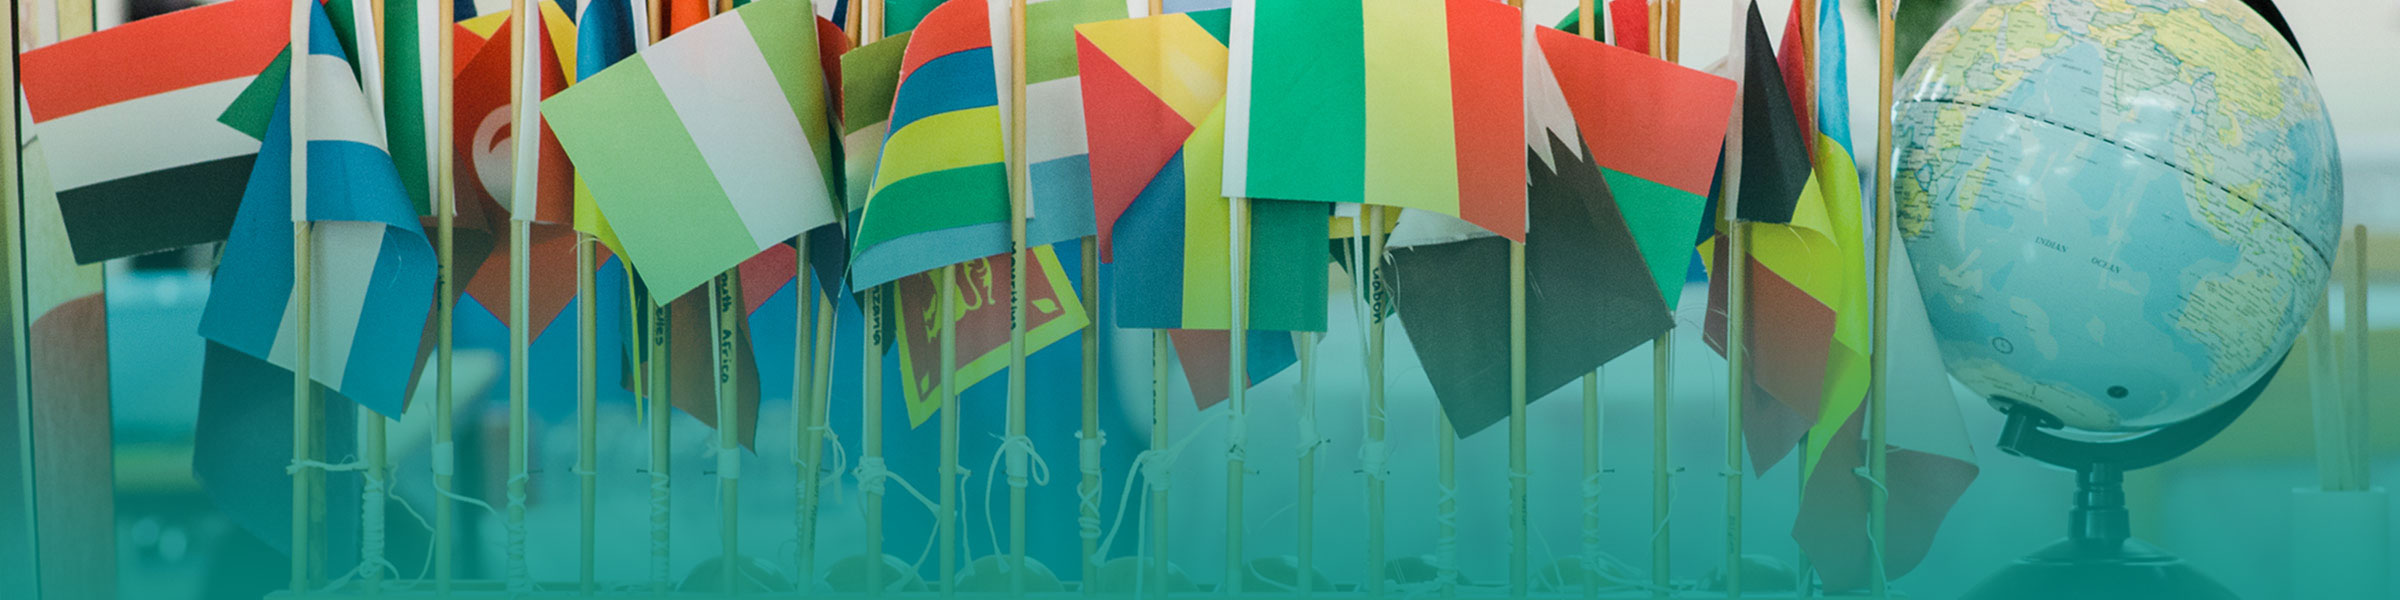 Flags of the world from Montessori classroom